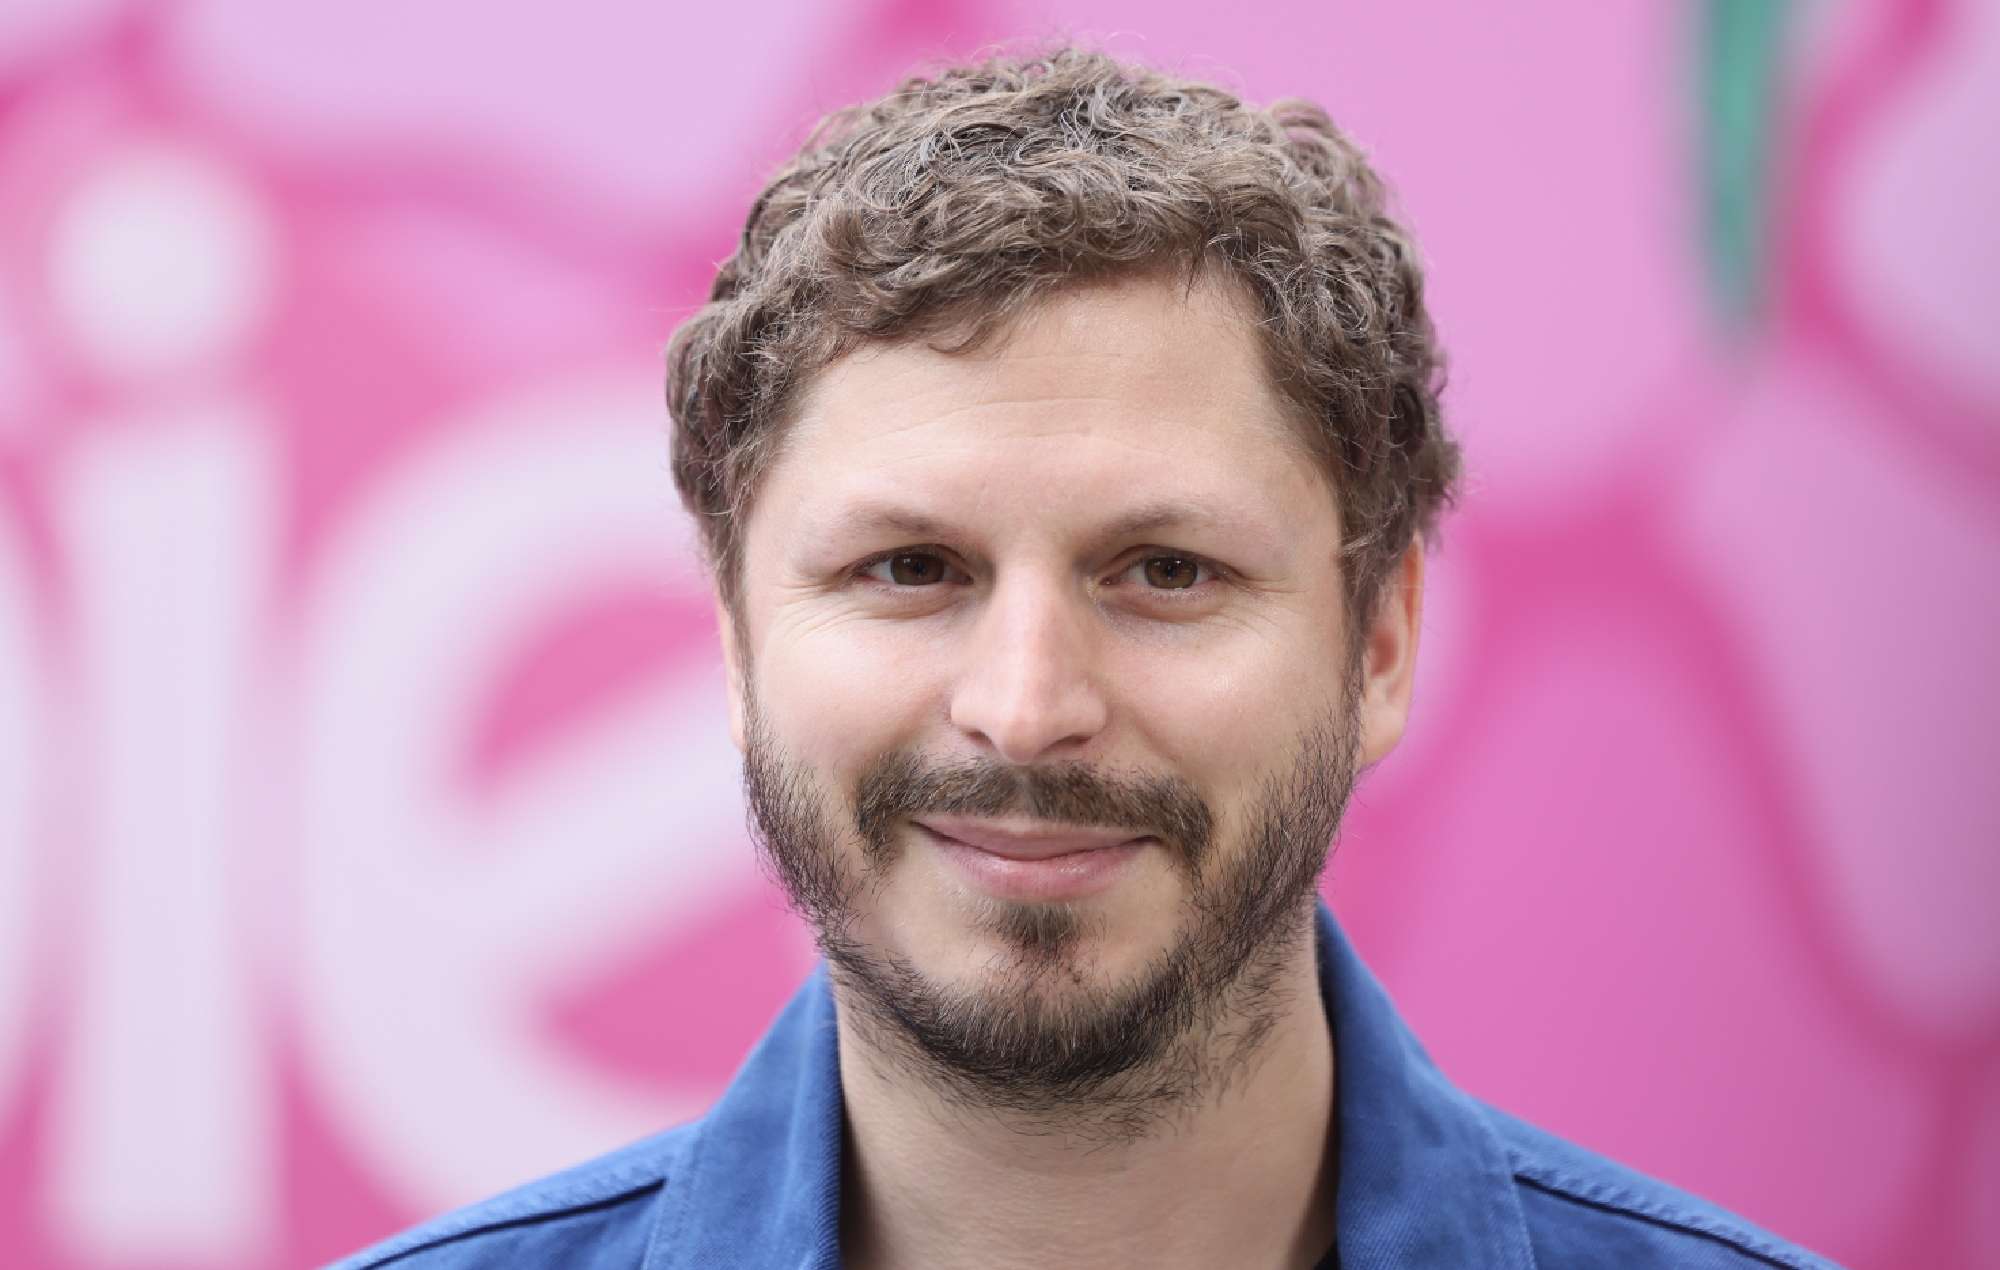 Michael Cera on Rihanna slapping him in the face: “It was great”